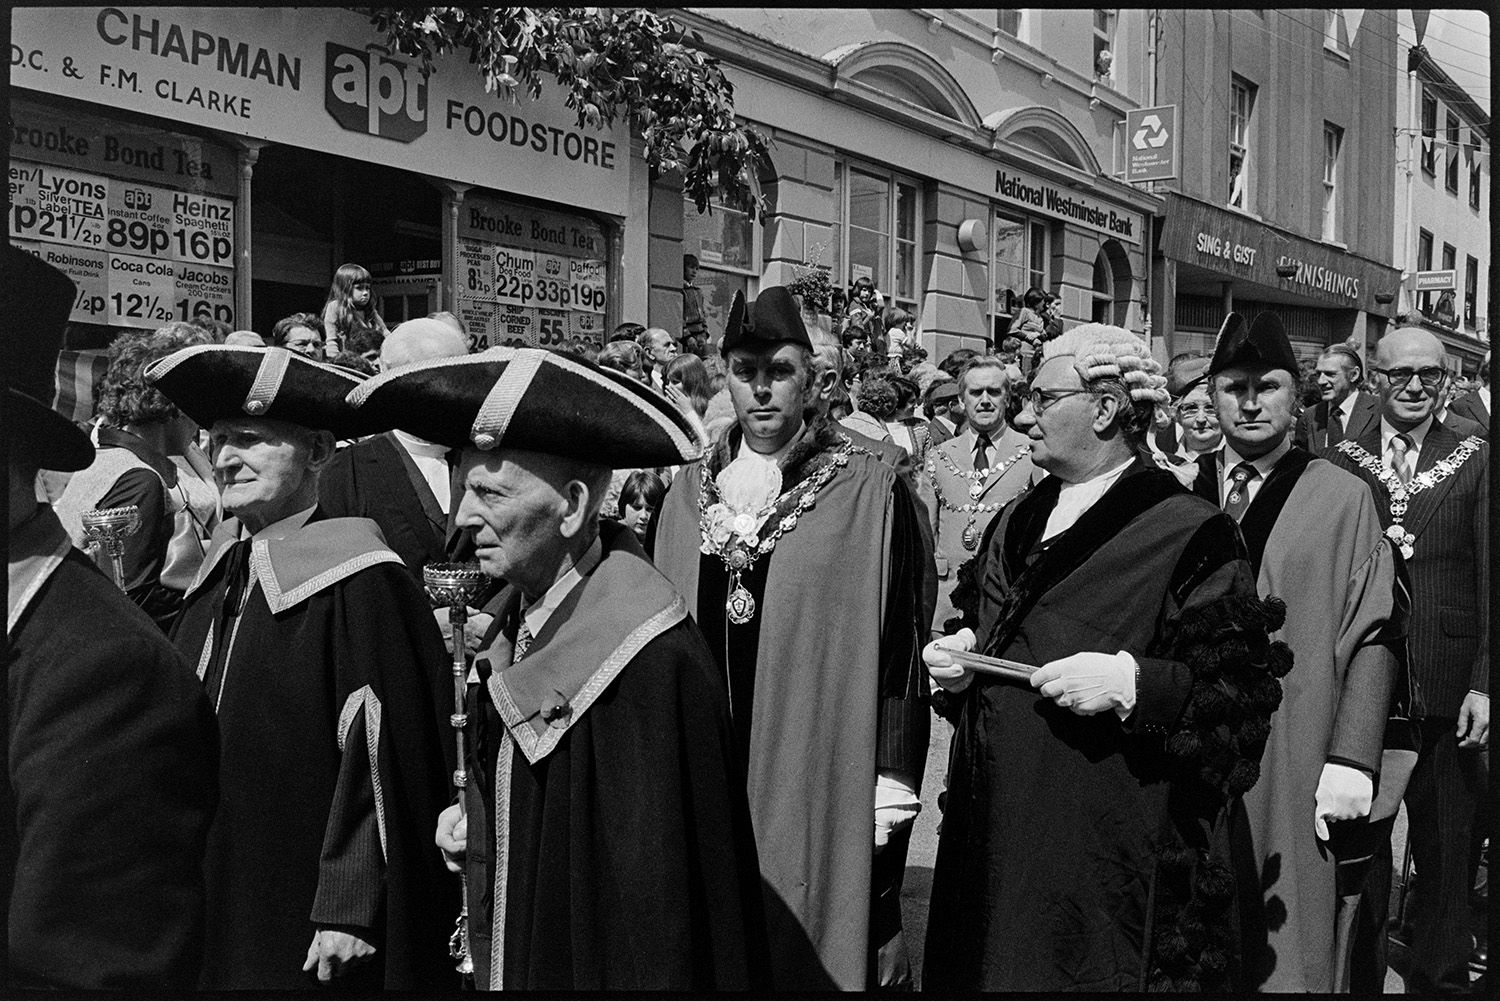 Mayors and dignitaries in parade round town making proclamation at points, town crier. 
[Dr Cramp, the Mayor, and other dignitaries parading through Torrington in the Torrington Mayfair parade. They are passing Chapman food store. Dr Cramp is wearing his mayoral chain of office and a bicorne hat. Spectators are lining the street watching the parade.]